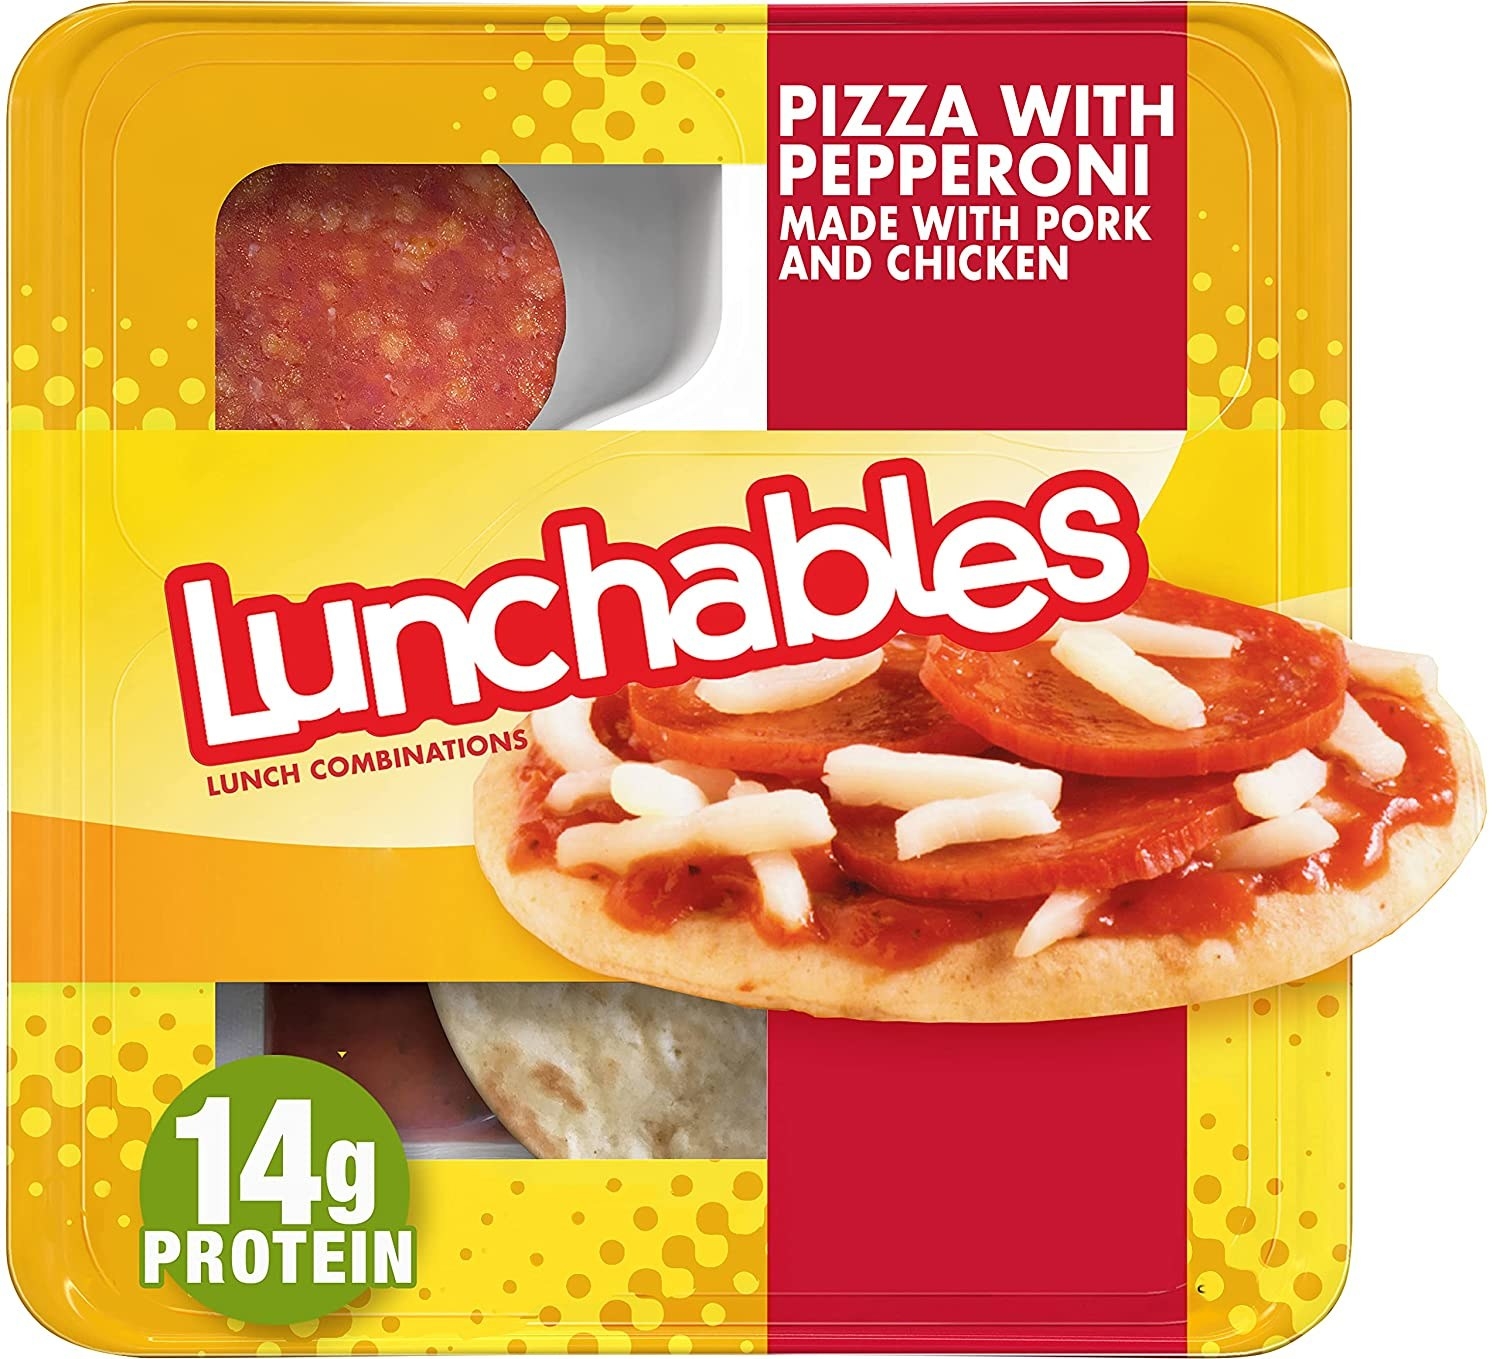 Pepperoni pizza Lunchables.